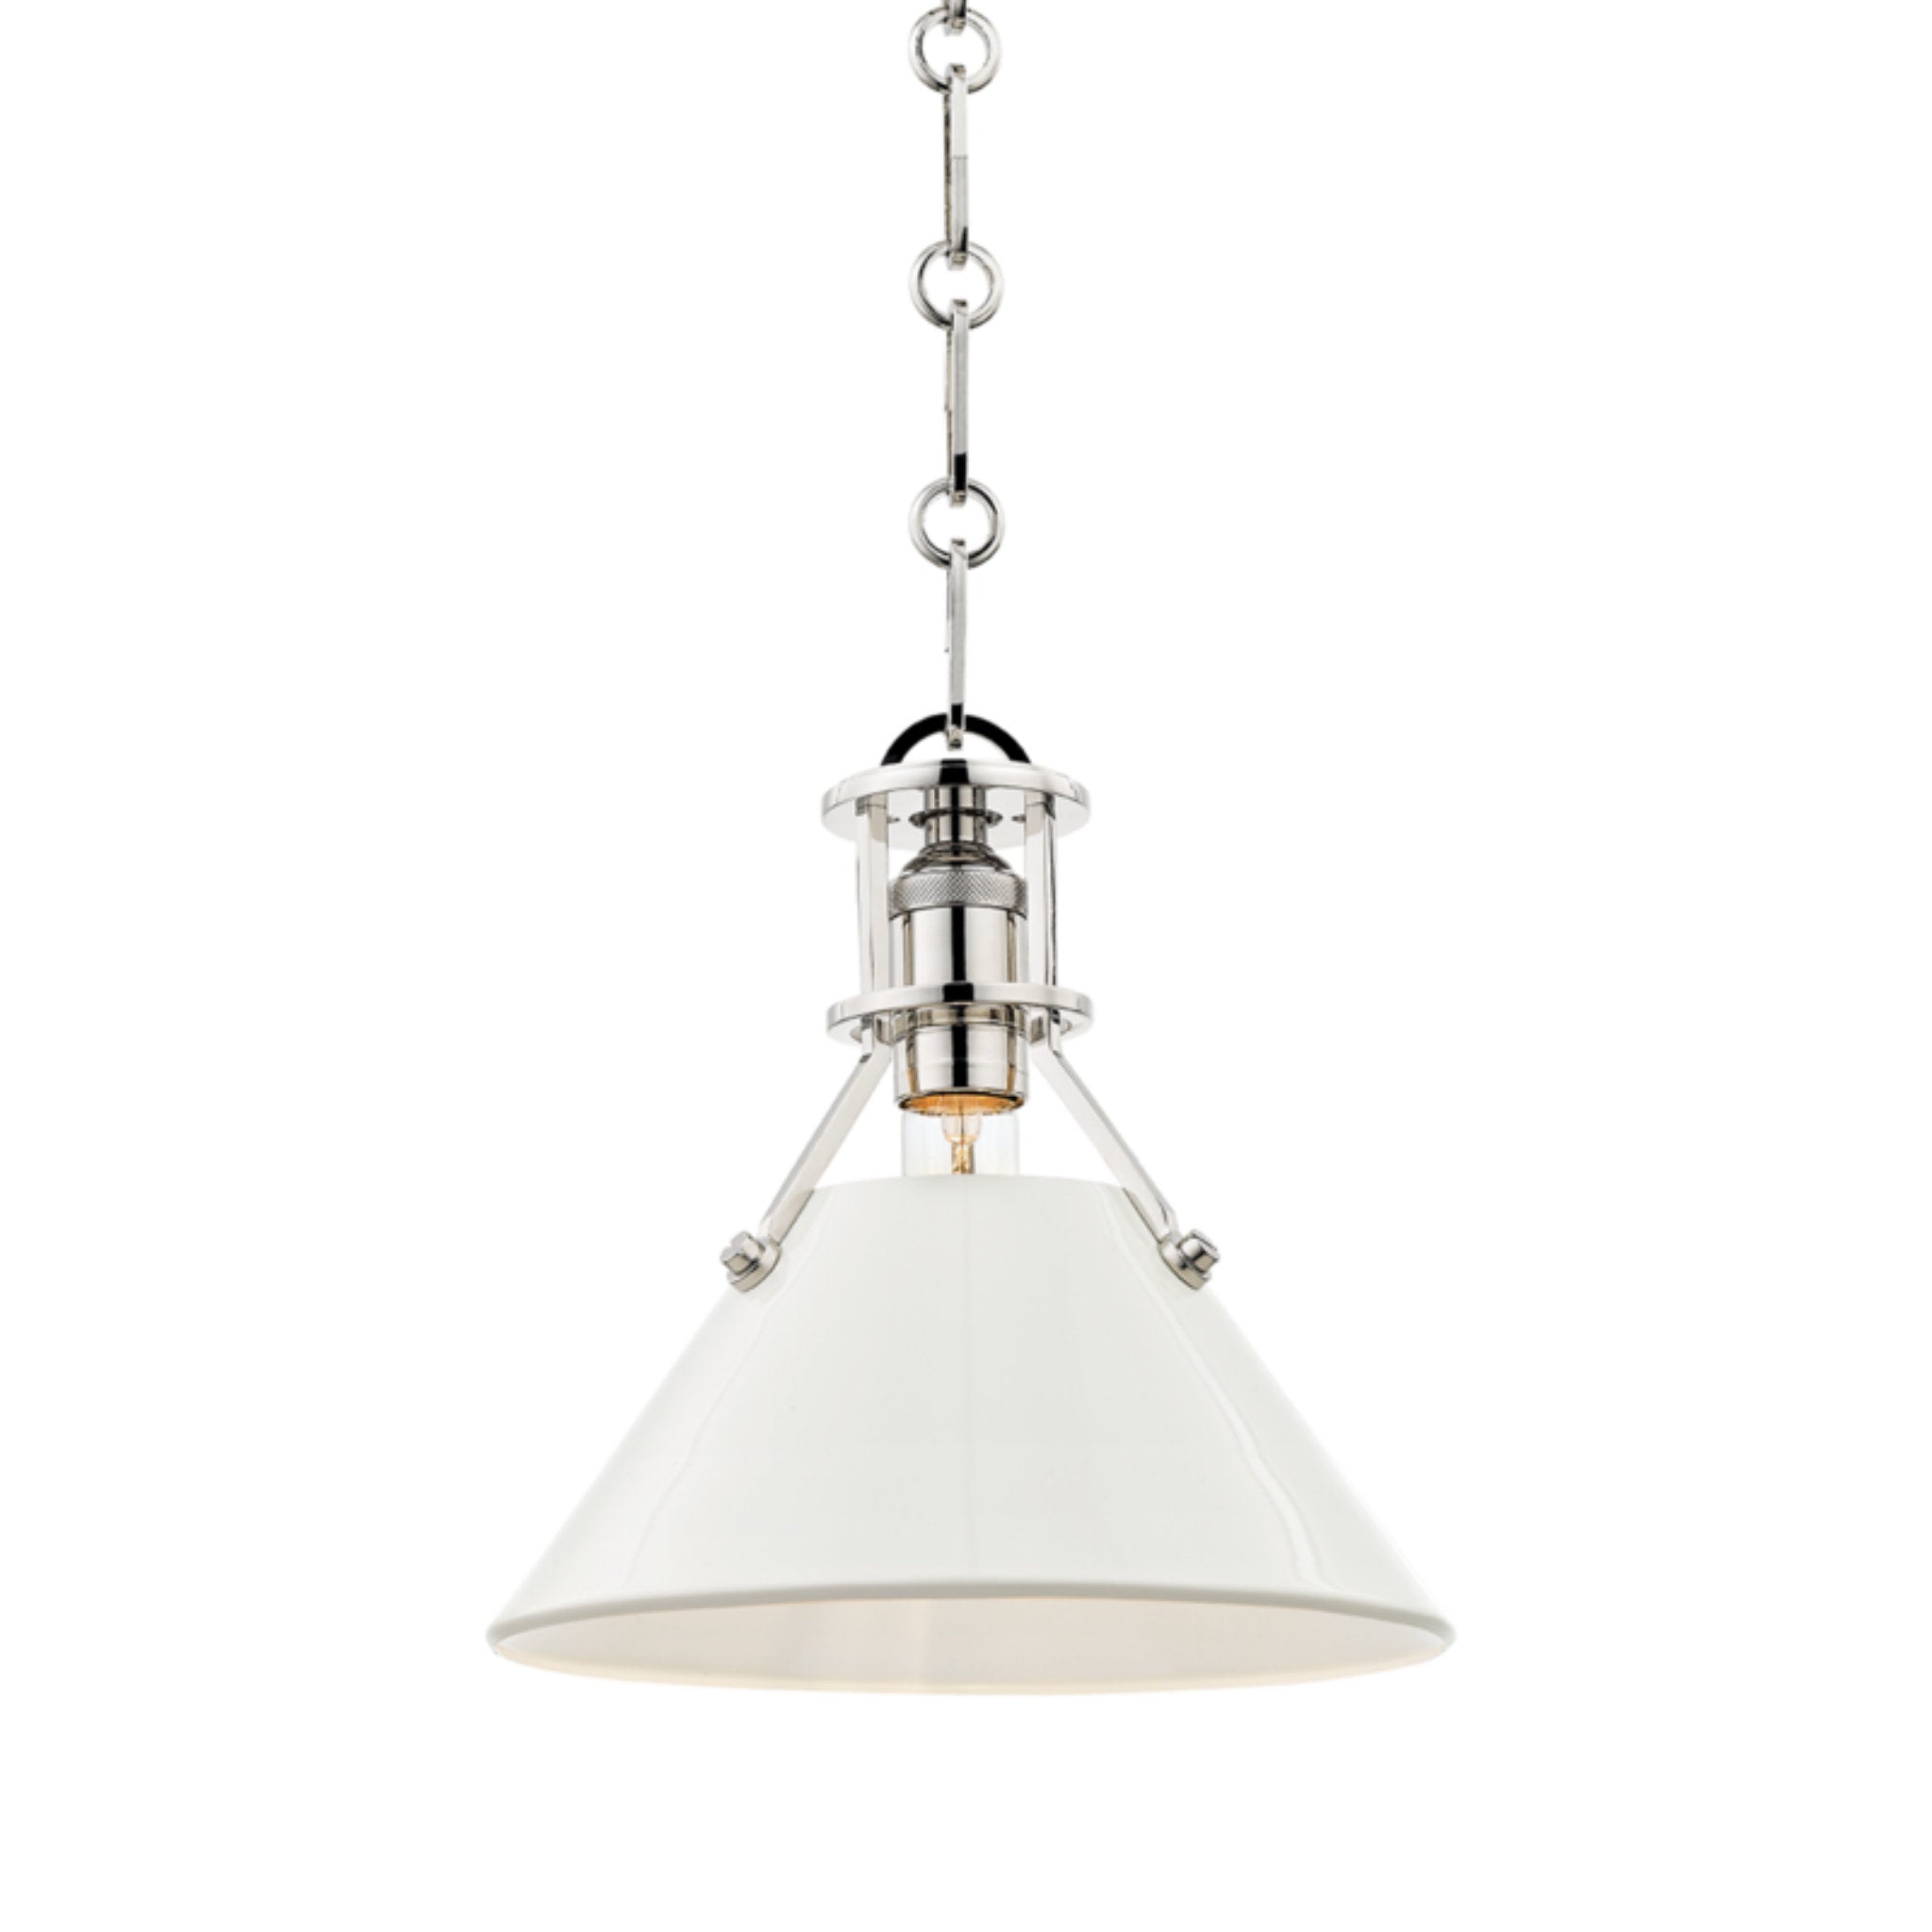 Painted No.2 1 Light Pendant in Polished Nickel/off White by Mark D. Sikes